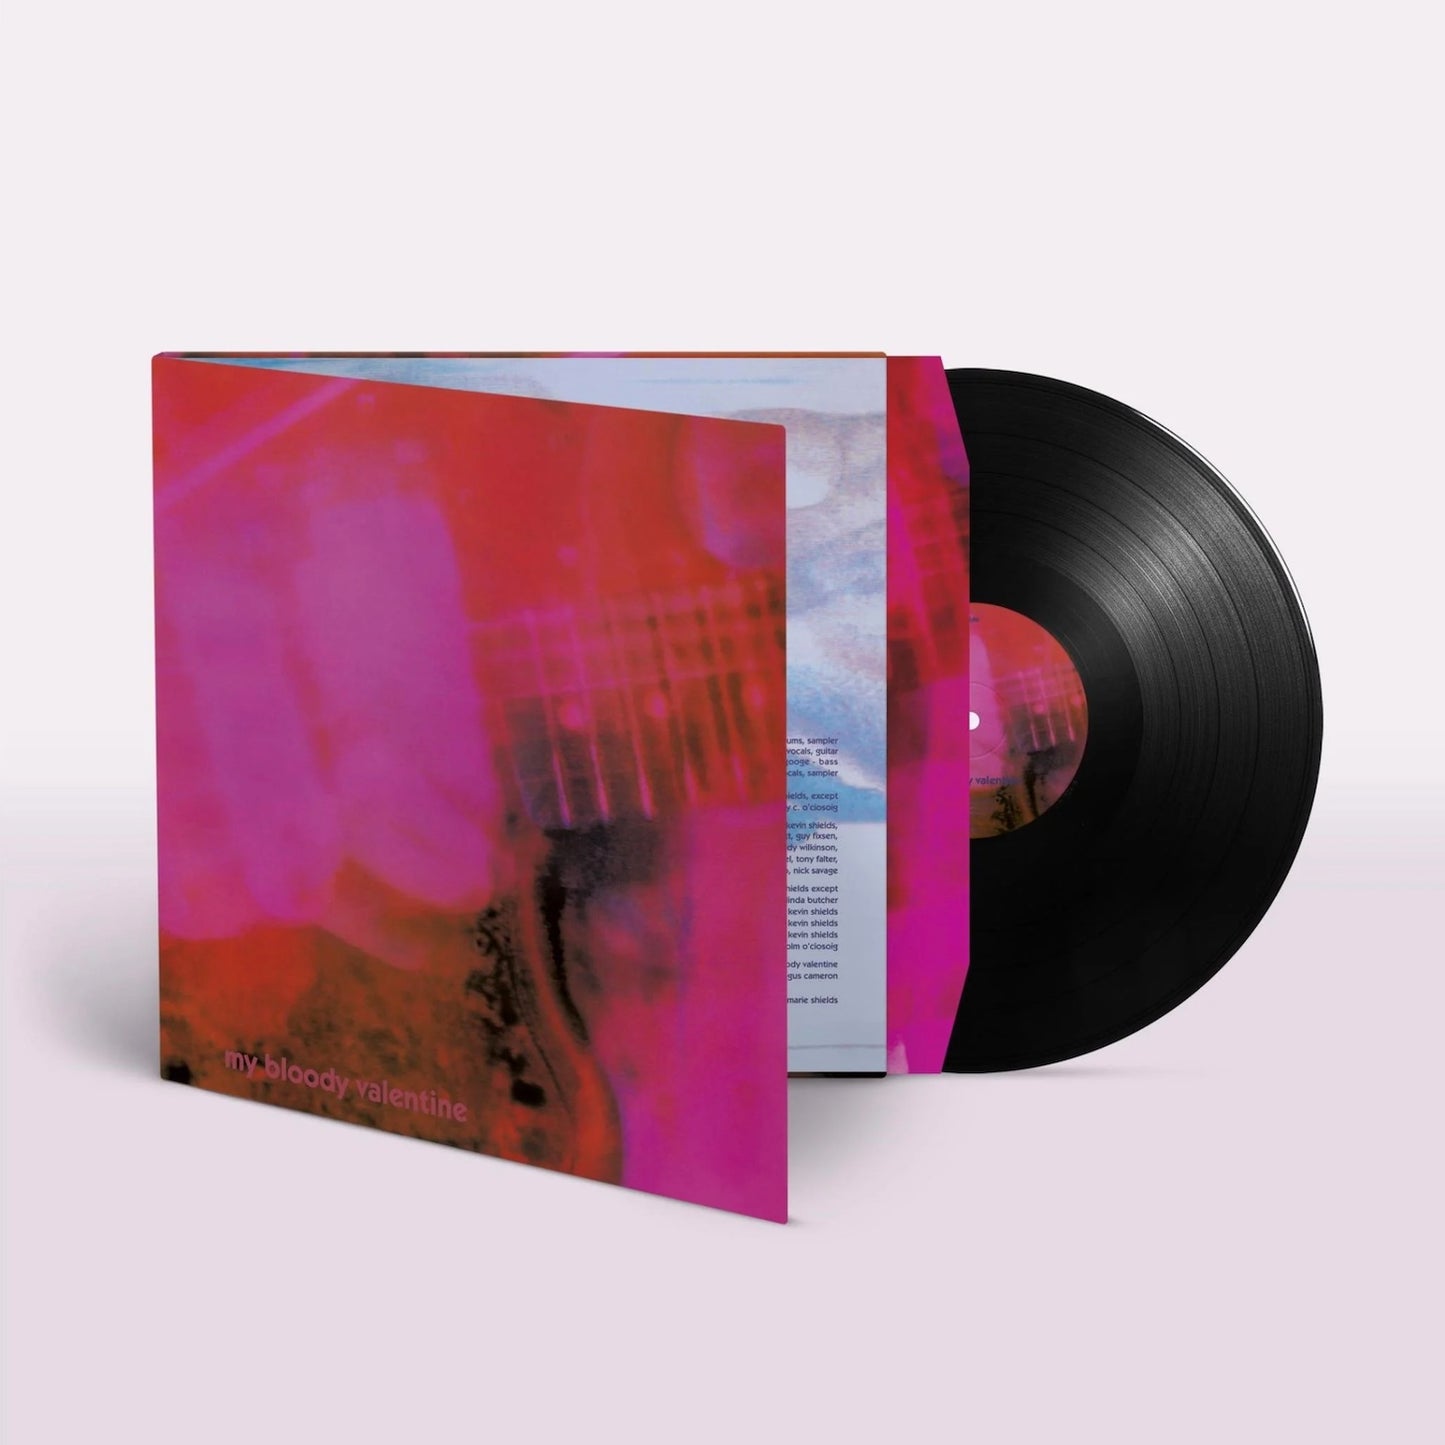 Load image into Gallery viewer, My Bloody Valentine - Loveless. LP [DELUXE - 2021 Reissue]
